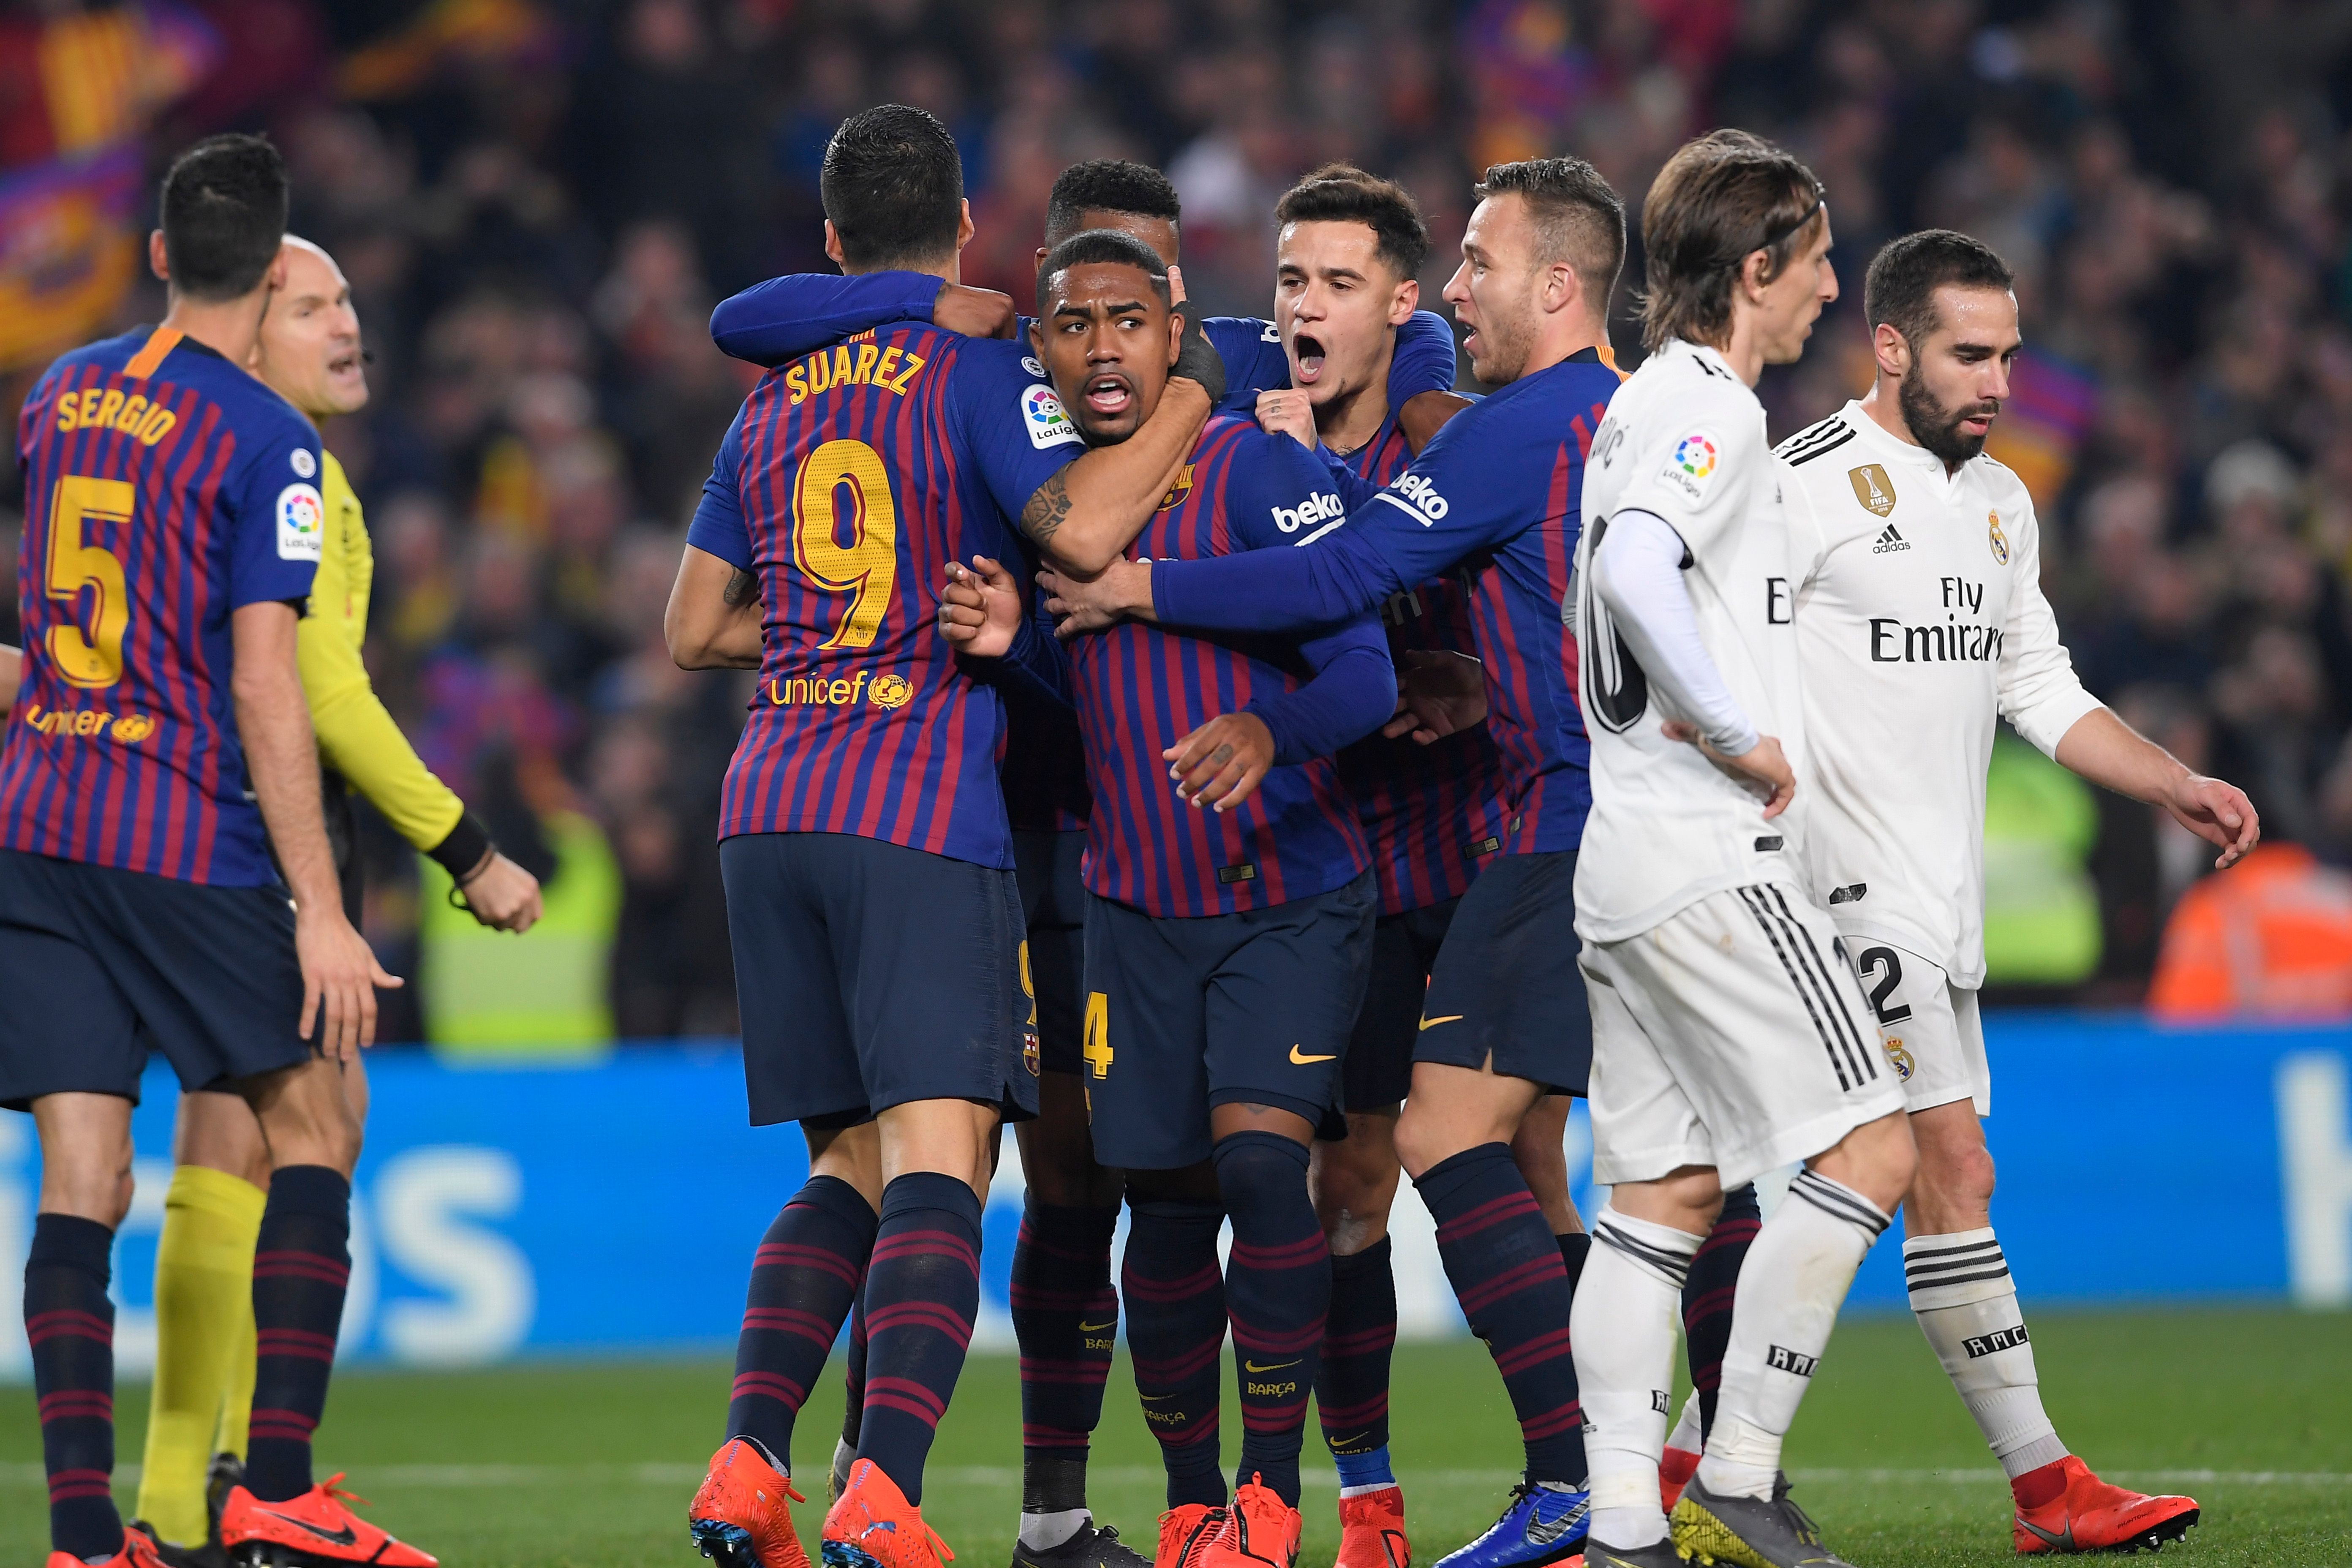 Barcelona's Brazilian midfielder Malcom (C) celebrates after scoring during the Spanish Copa del Rey (King's Cup) semi-final first leg football match between FC Barcelona and Real Madrid CF at the Camp Nou stadium in Barcelona on February 6, 2019. (Photo by LLUIS GENE / AFP)        (Photo credit should read LLUIS GENE/AFP/Getty Images)